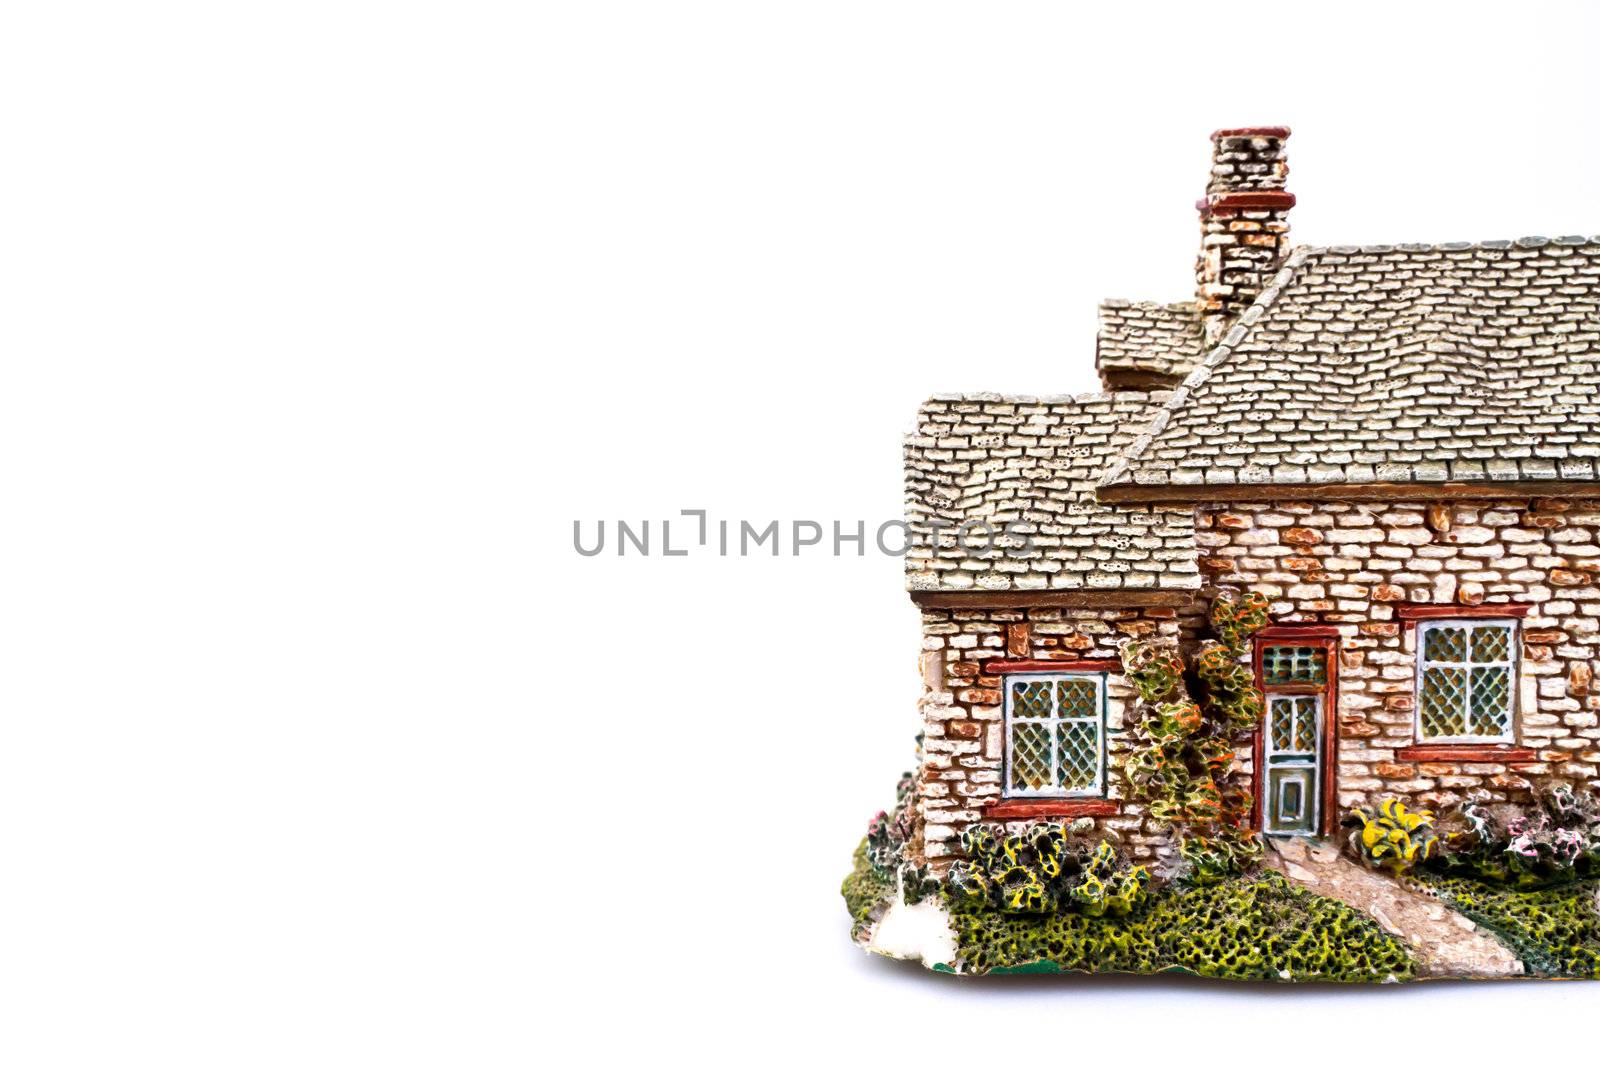 Replica of an country house on White Background with copy space